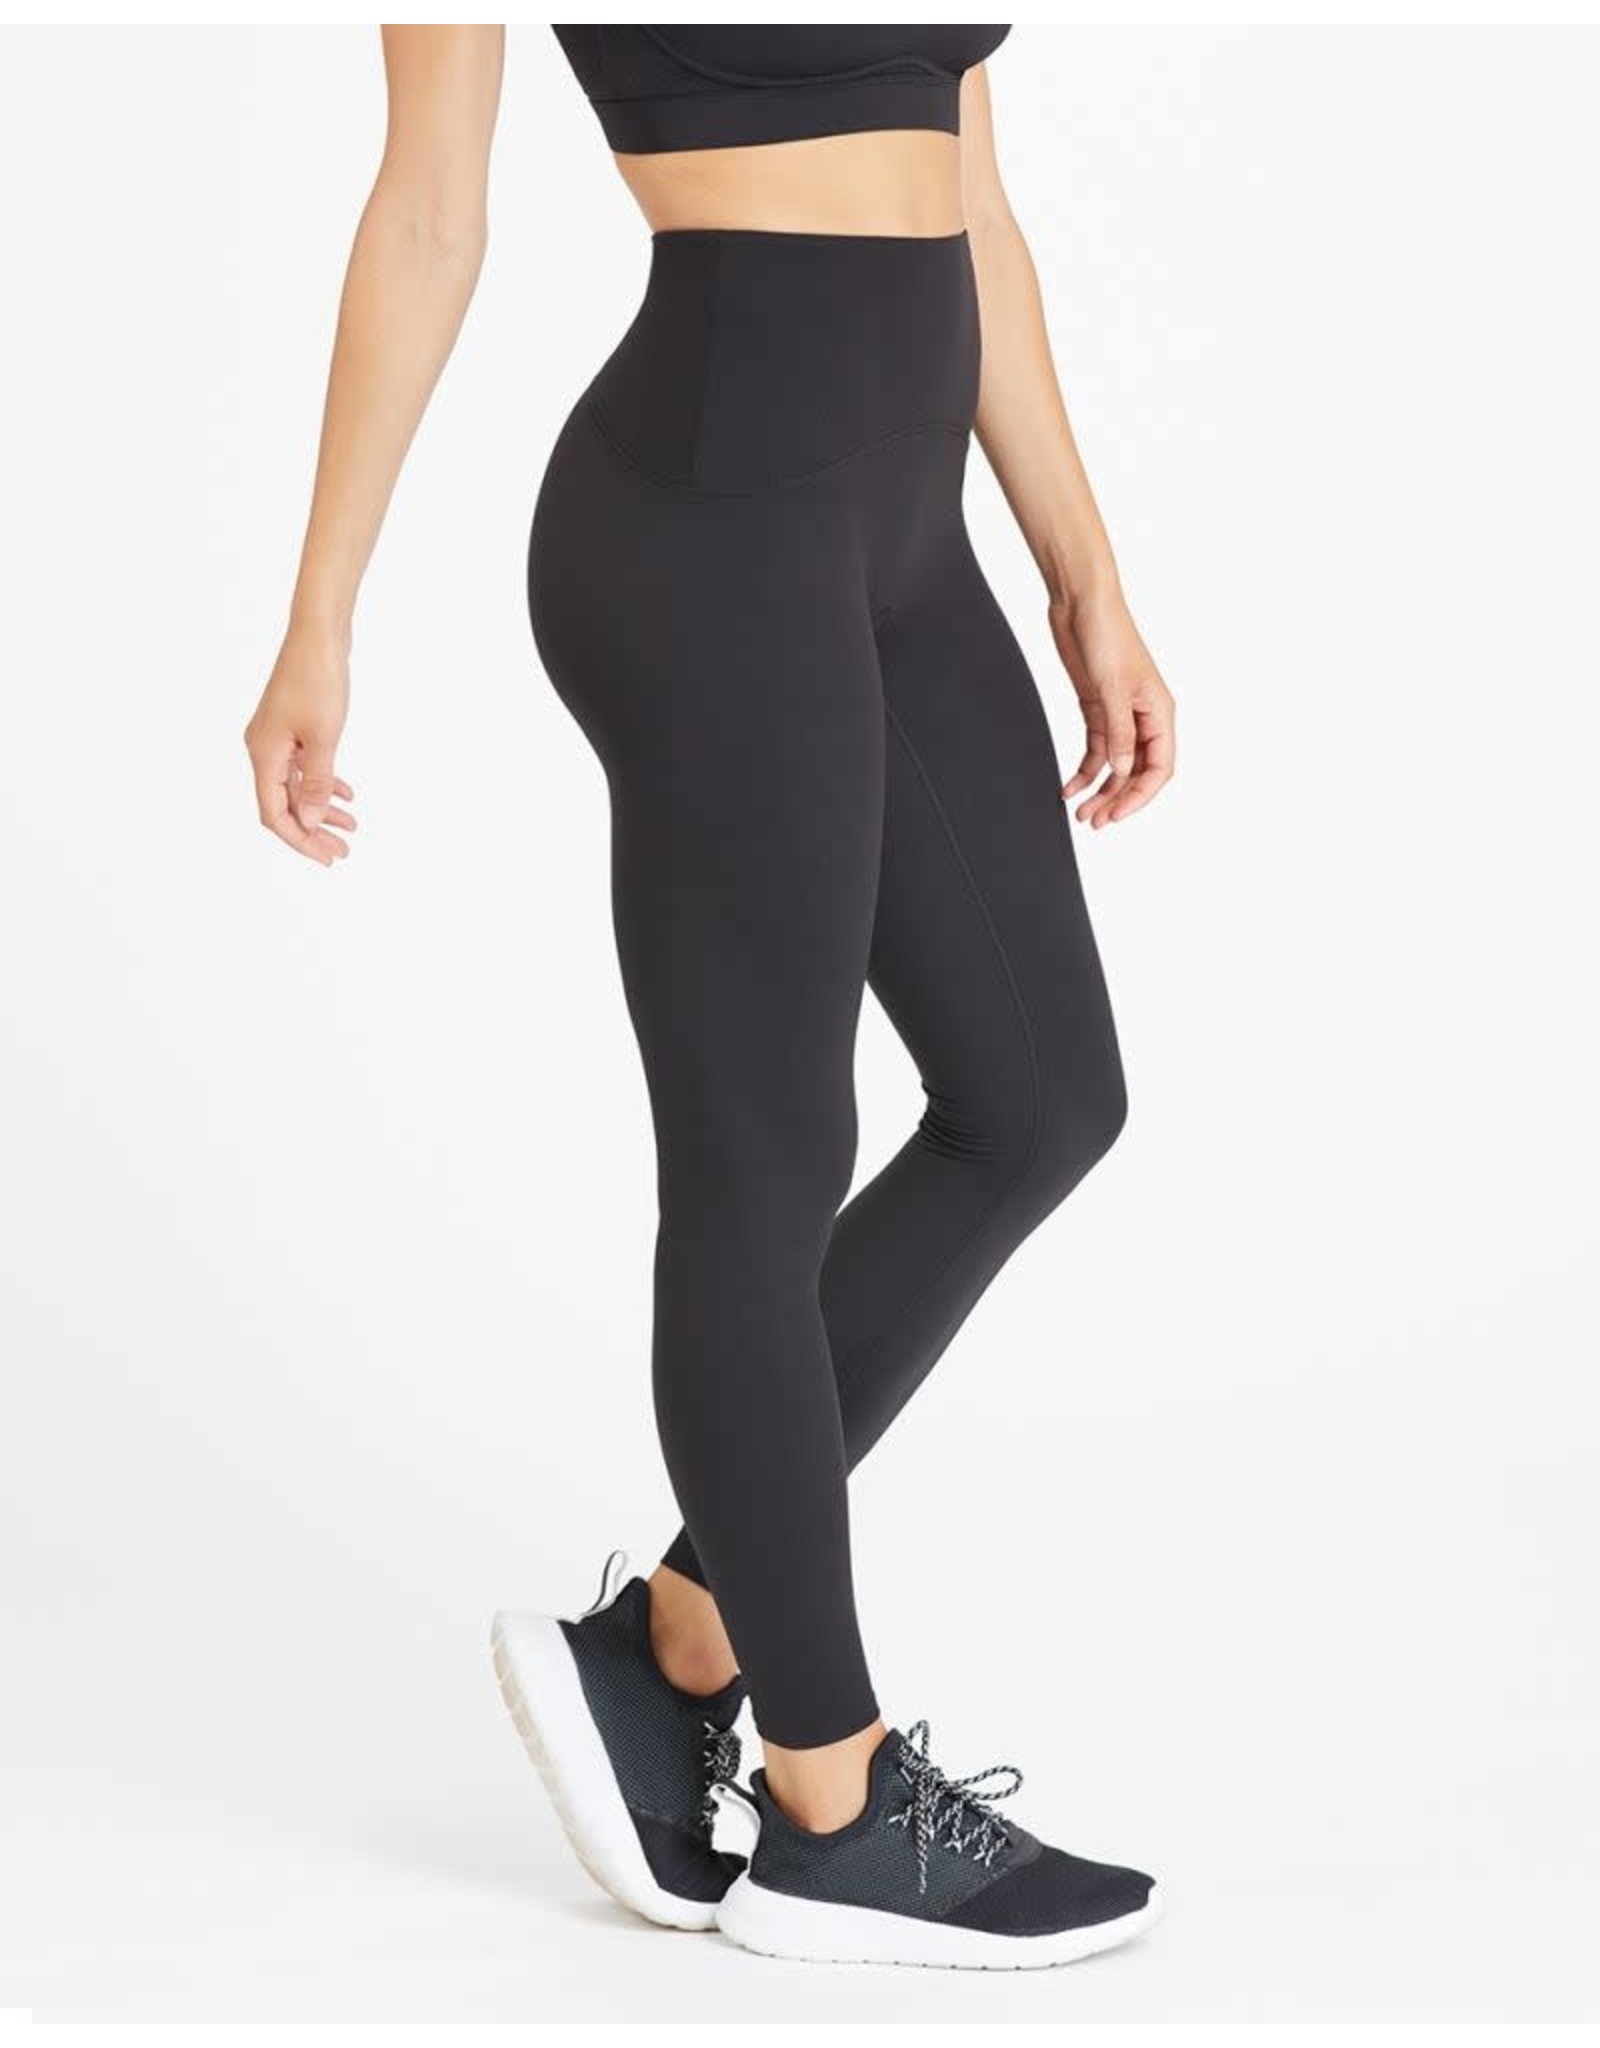 SPANX, Pants & Jumpsuits, Spanx Booty Boost Active 78 Leggings 2xl Black